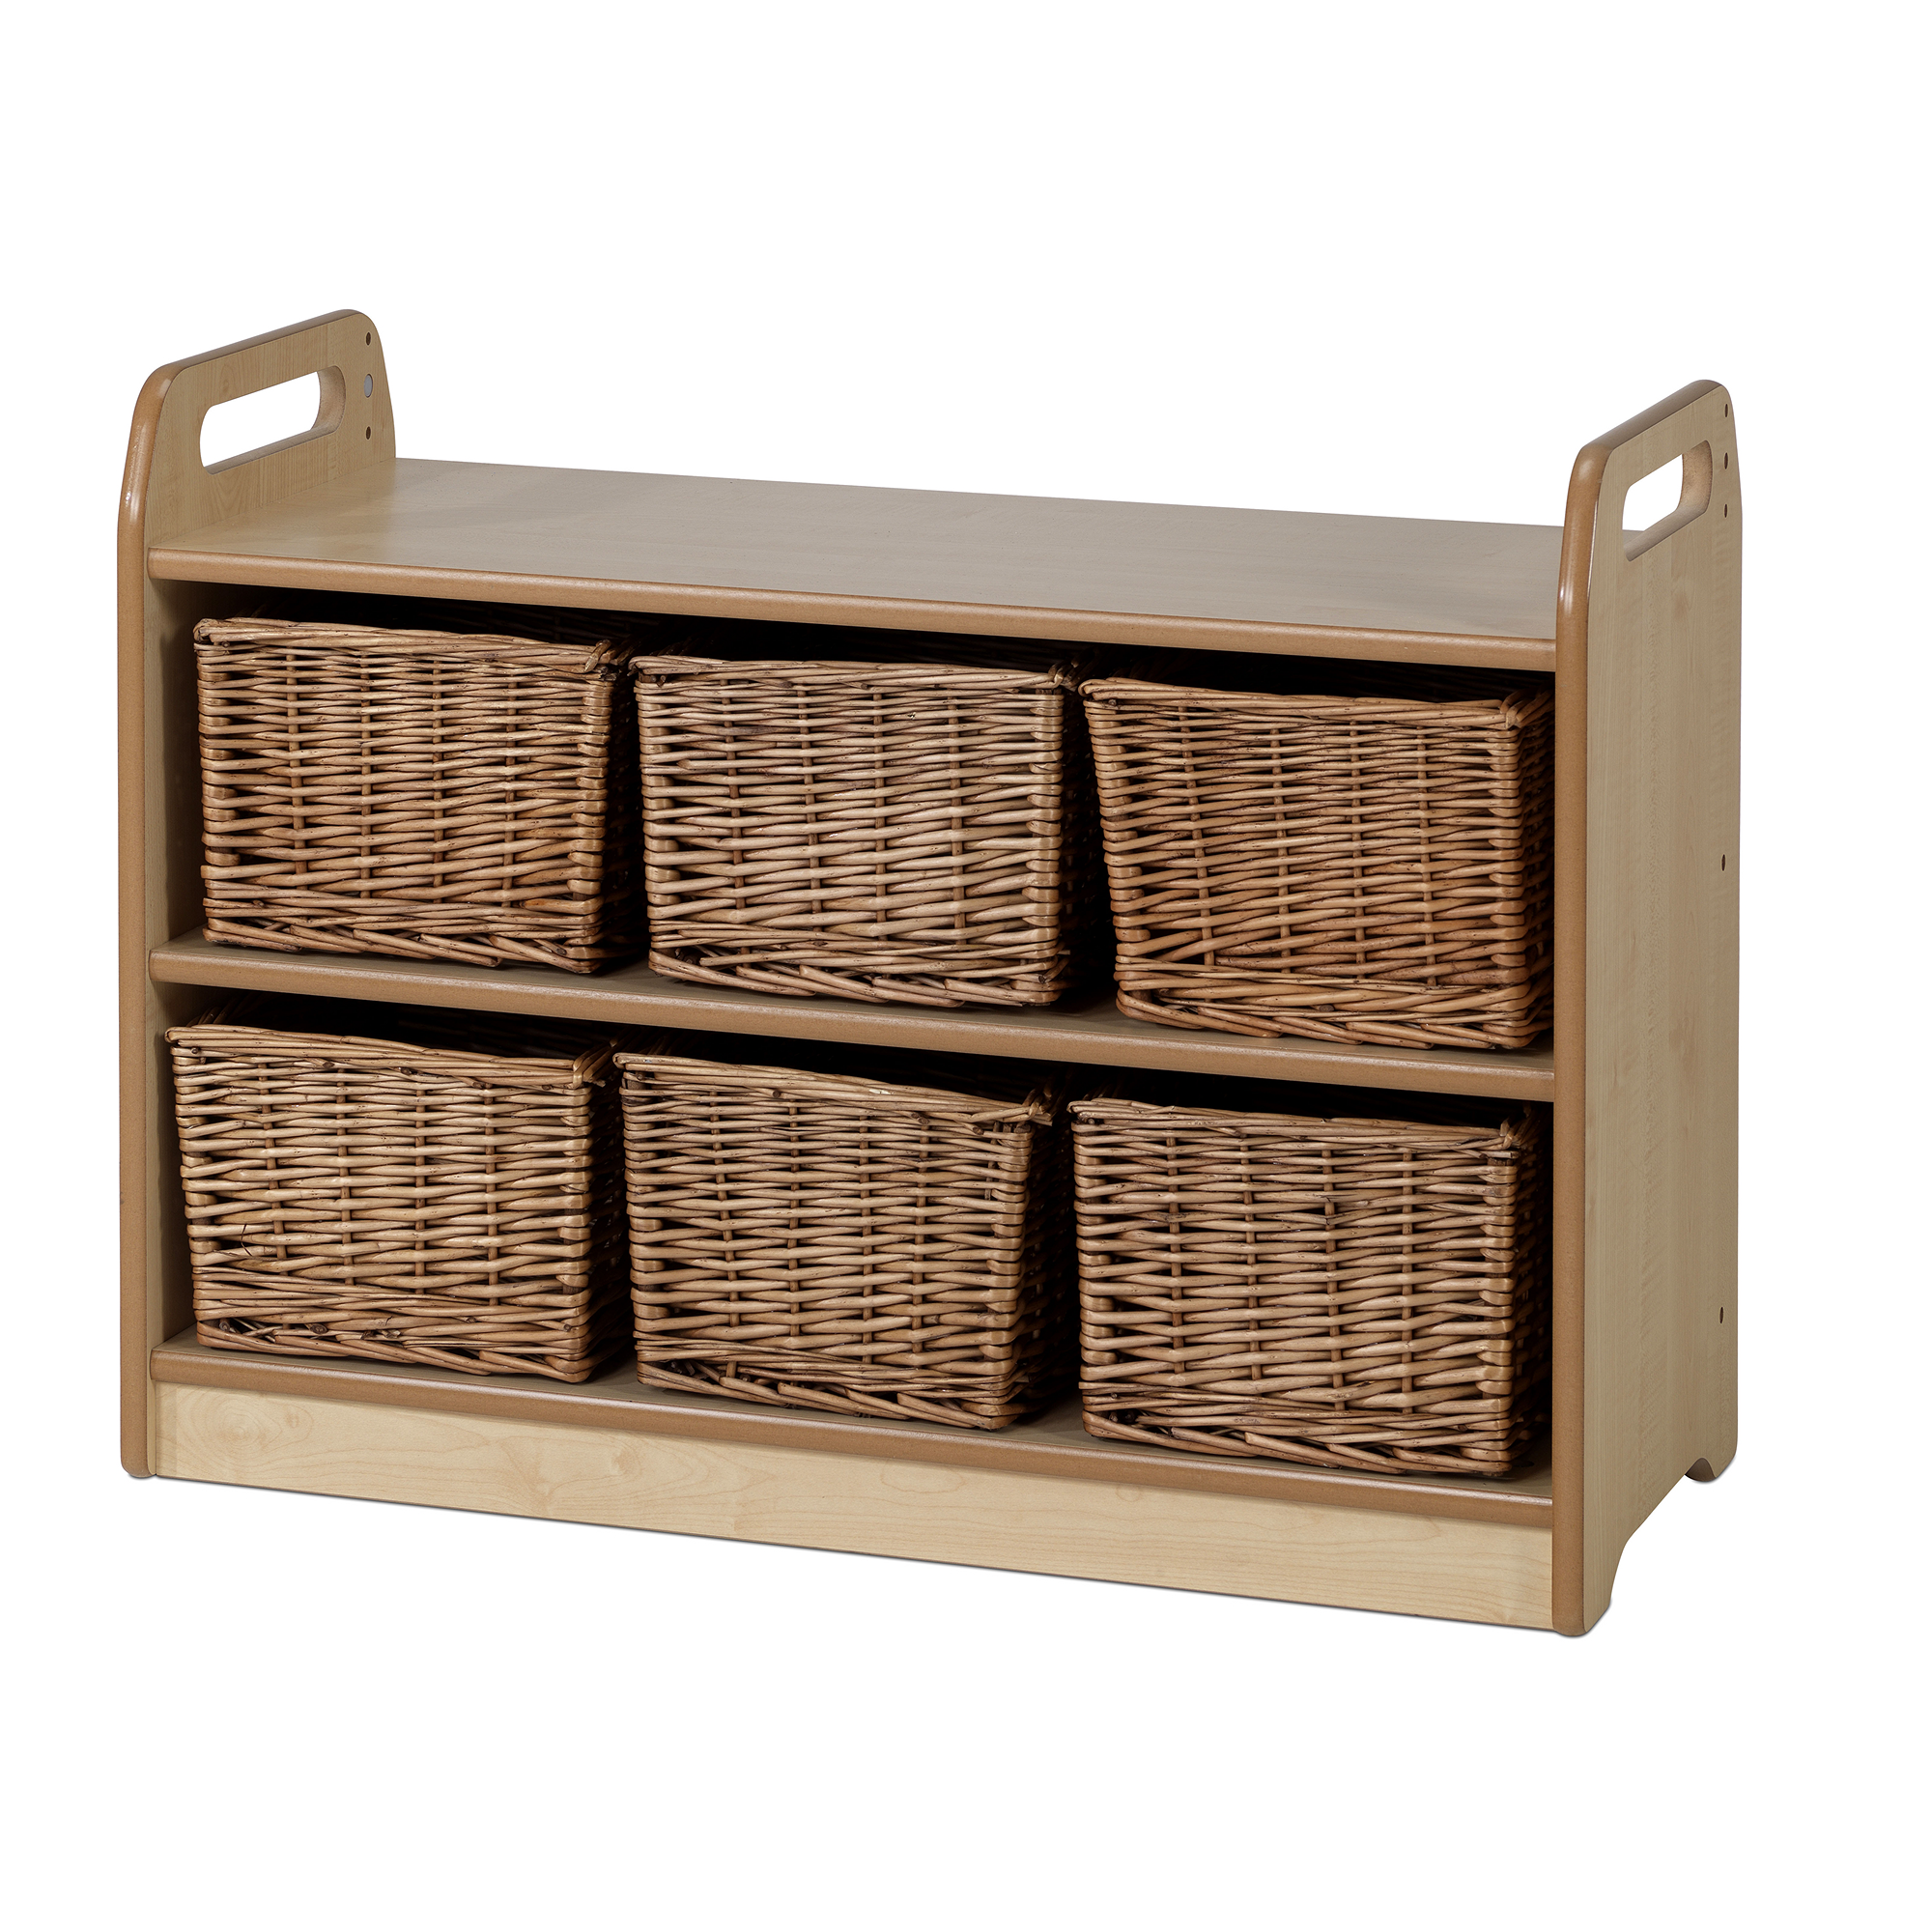 Display Unit with Mirror -Wicker Baskets